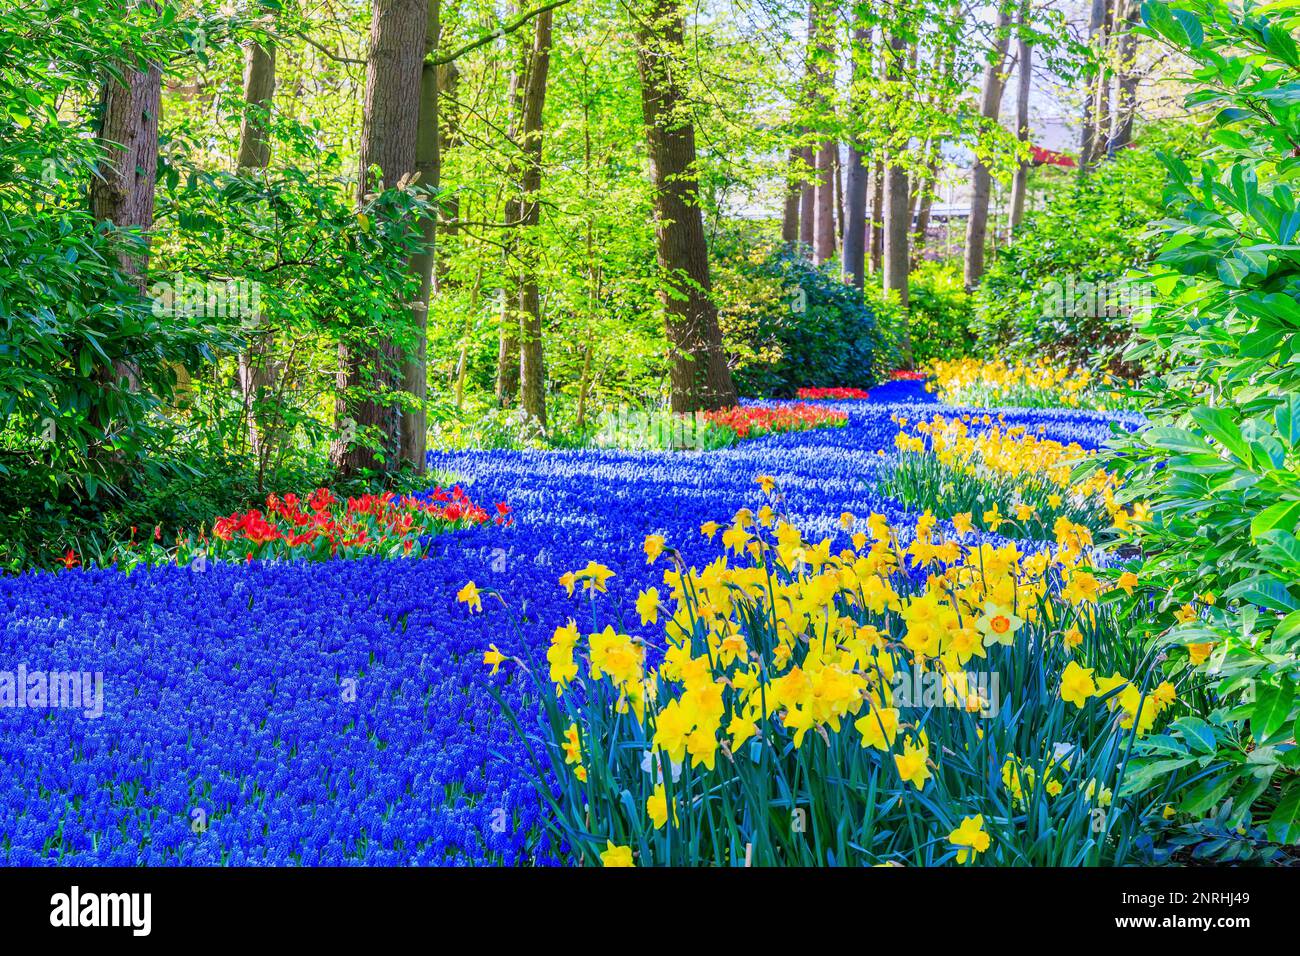 Blooming colorful flowerbed at the public flower garden. Lisse, Holland, Netherlands. Stock Photo